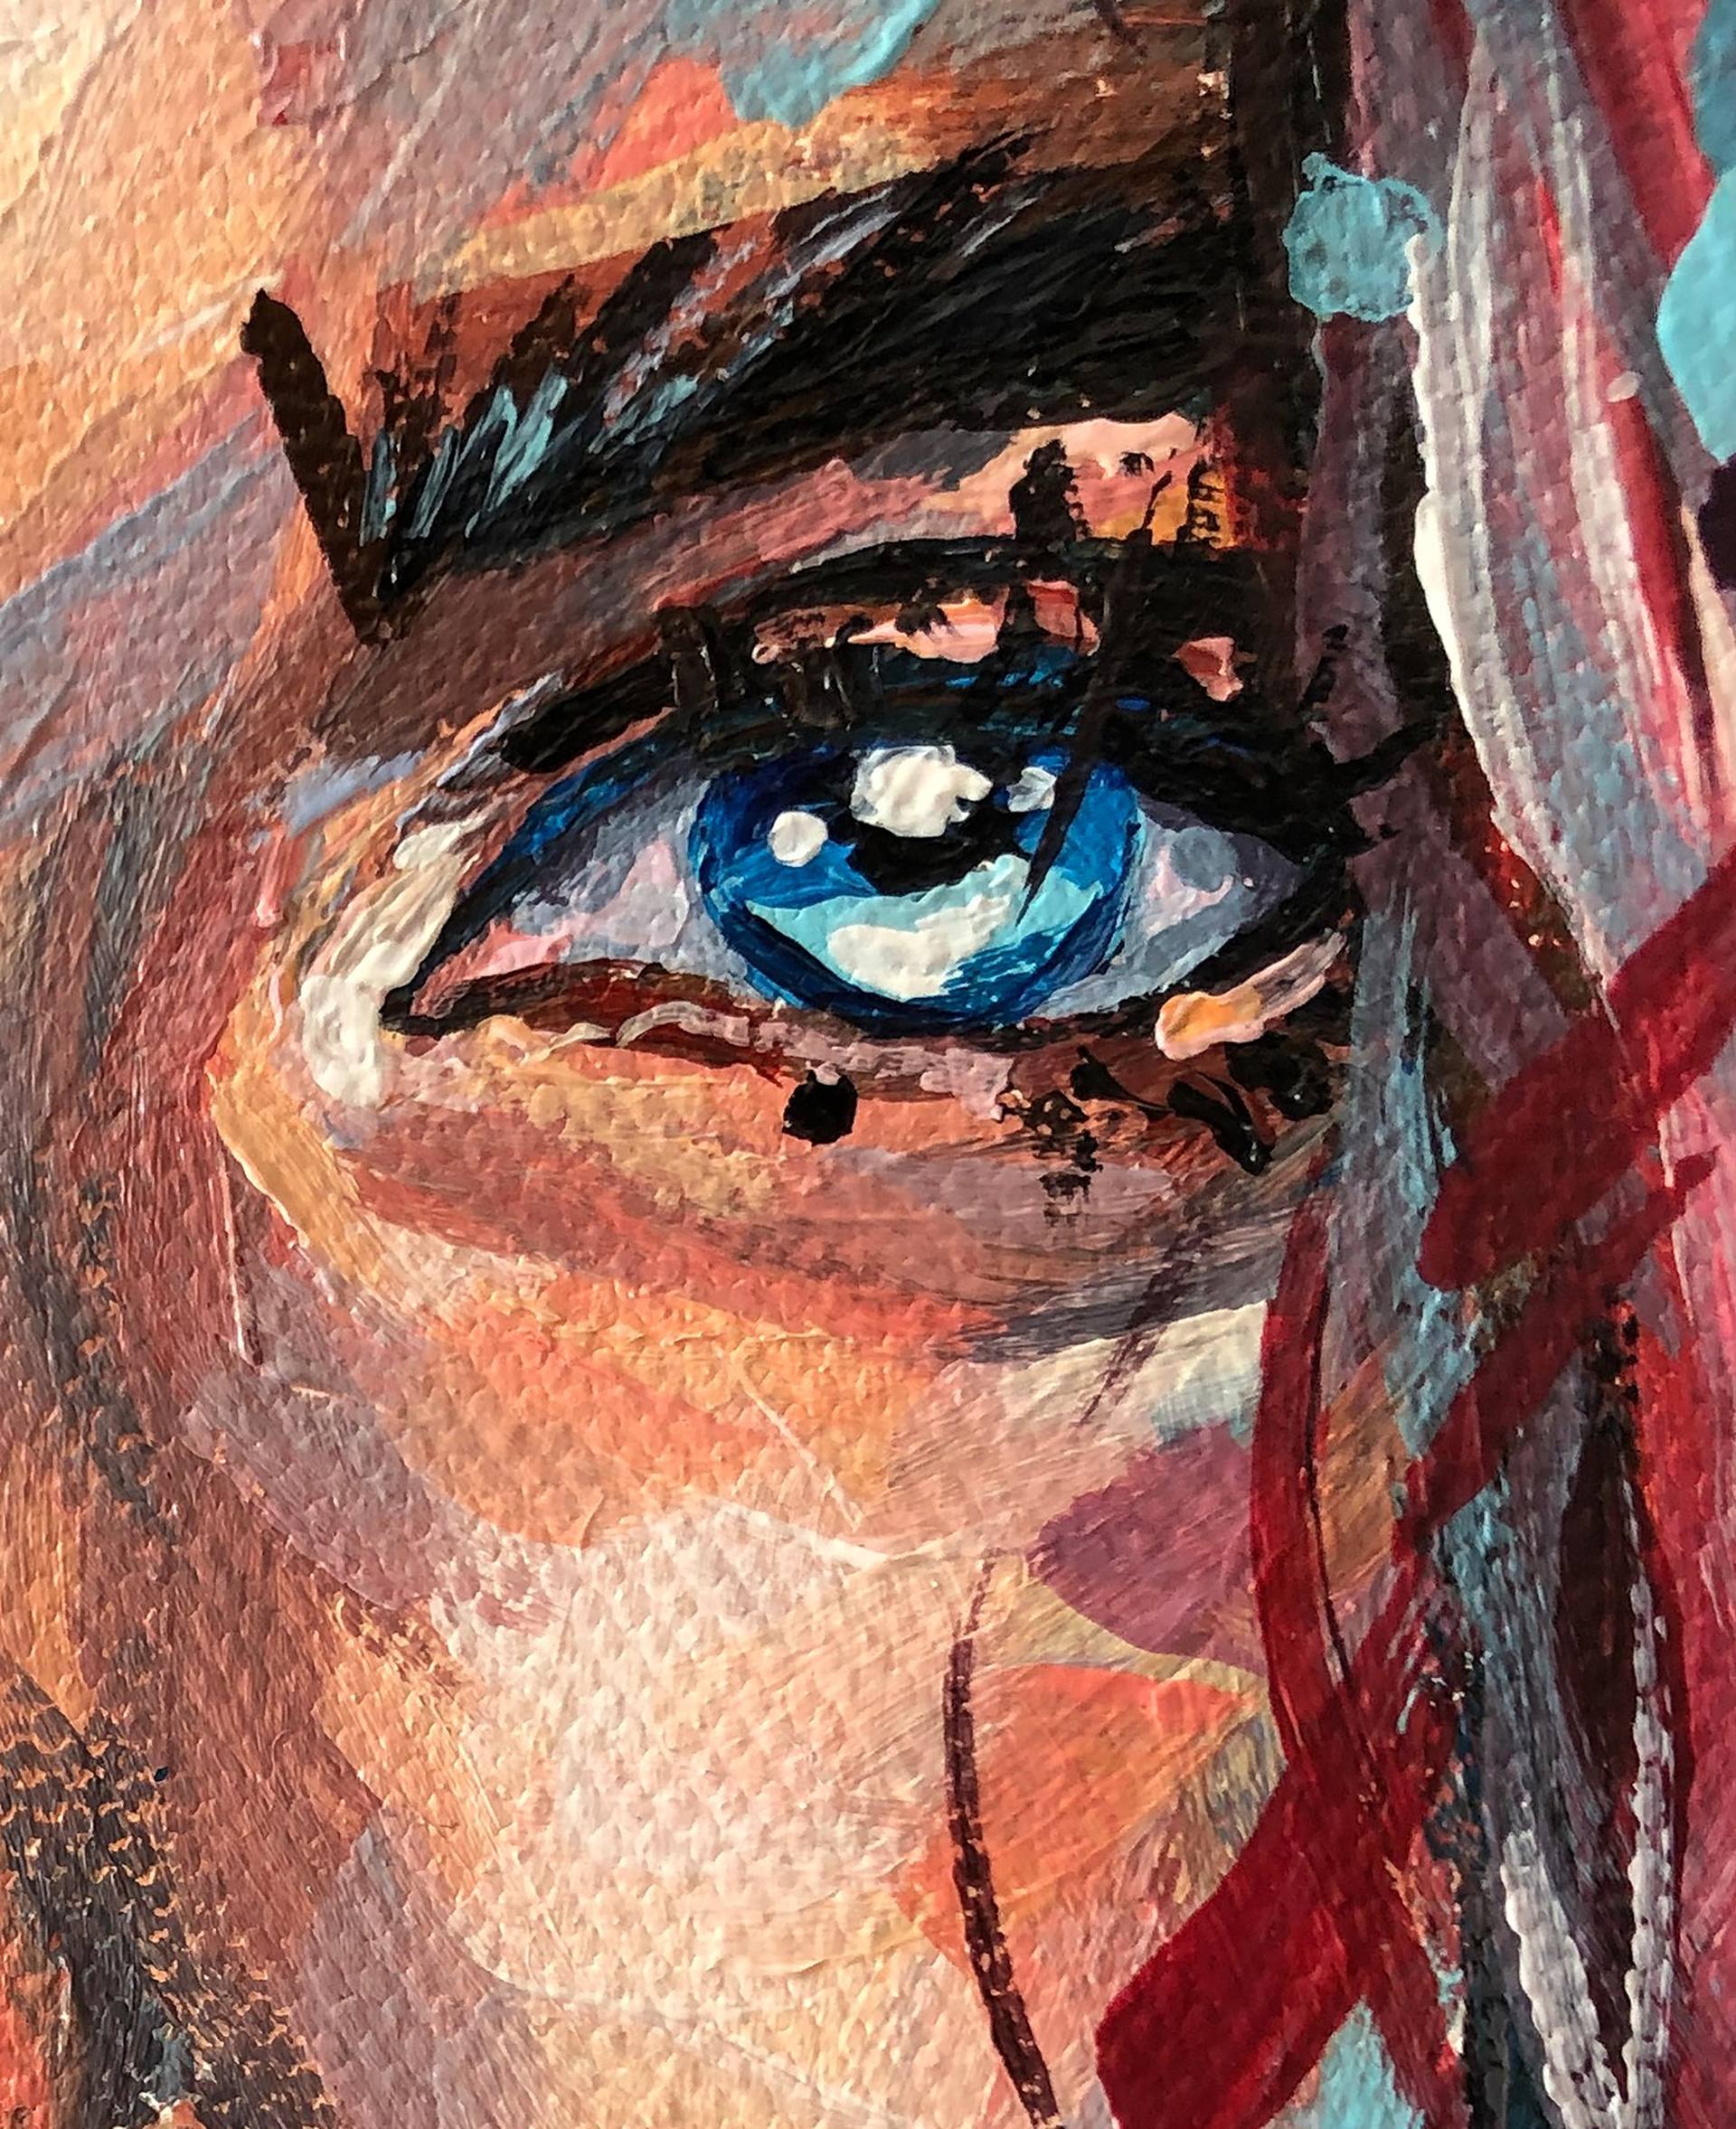 Blue Eyed Woman With a Halo. Original Acrylic 5x7 Painting on